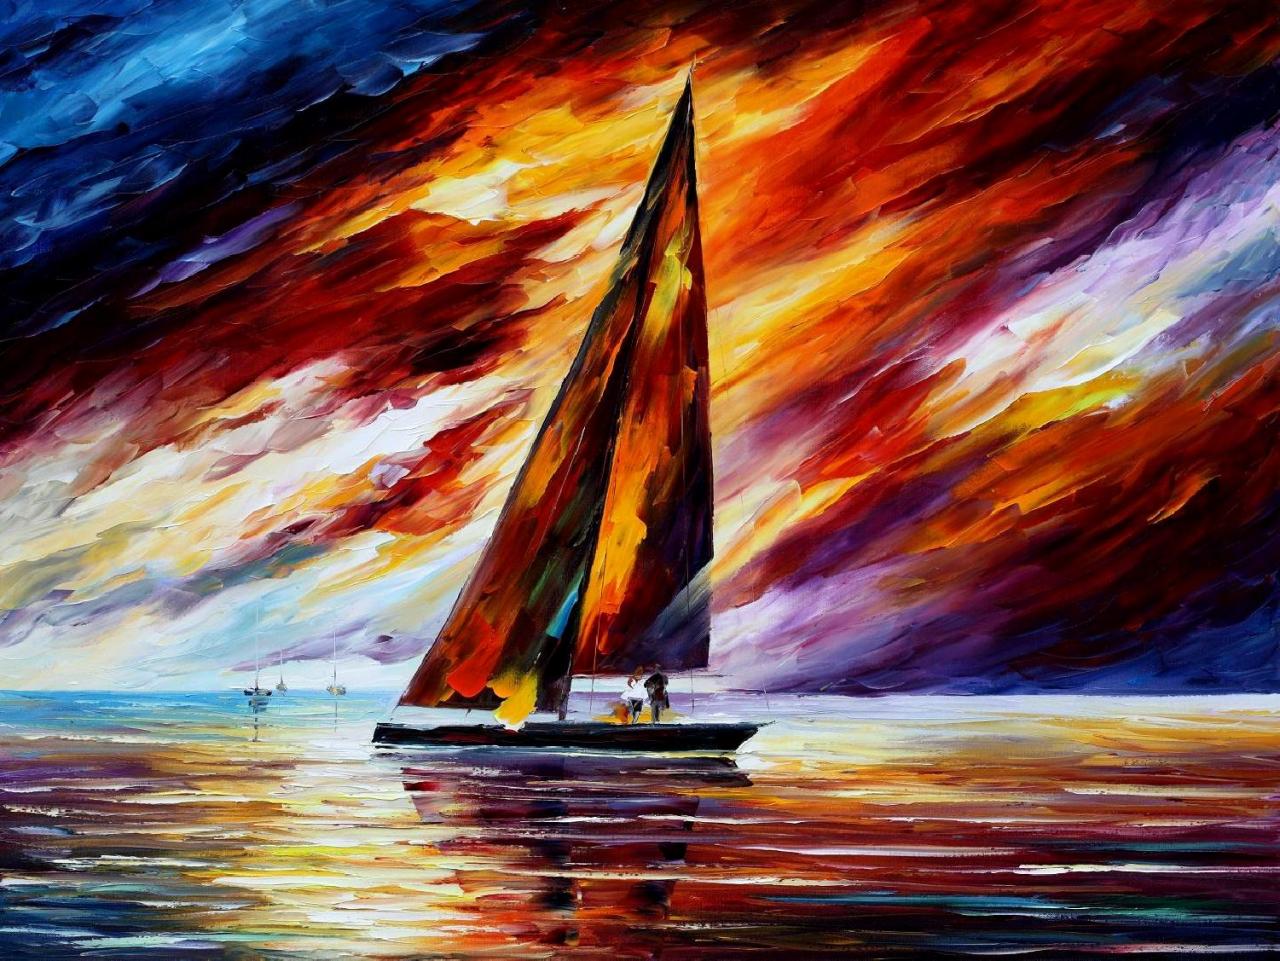 Into The Wilderness — Print On Canvas By Leonid Afremov - Size 40" X 30" (100cm X 75cm)